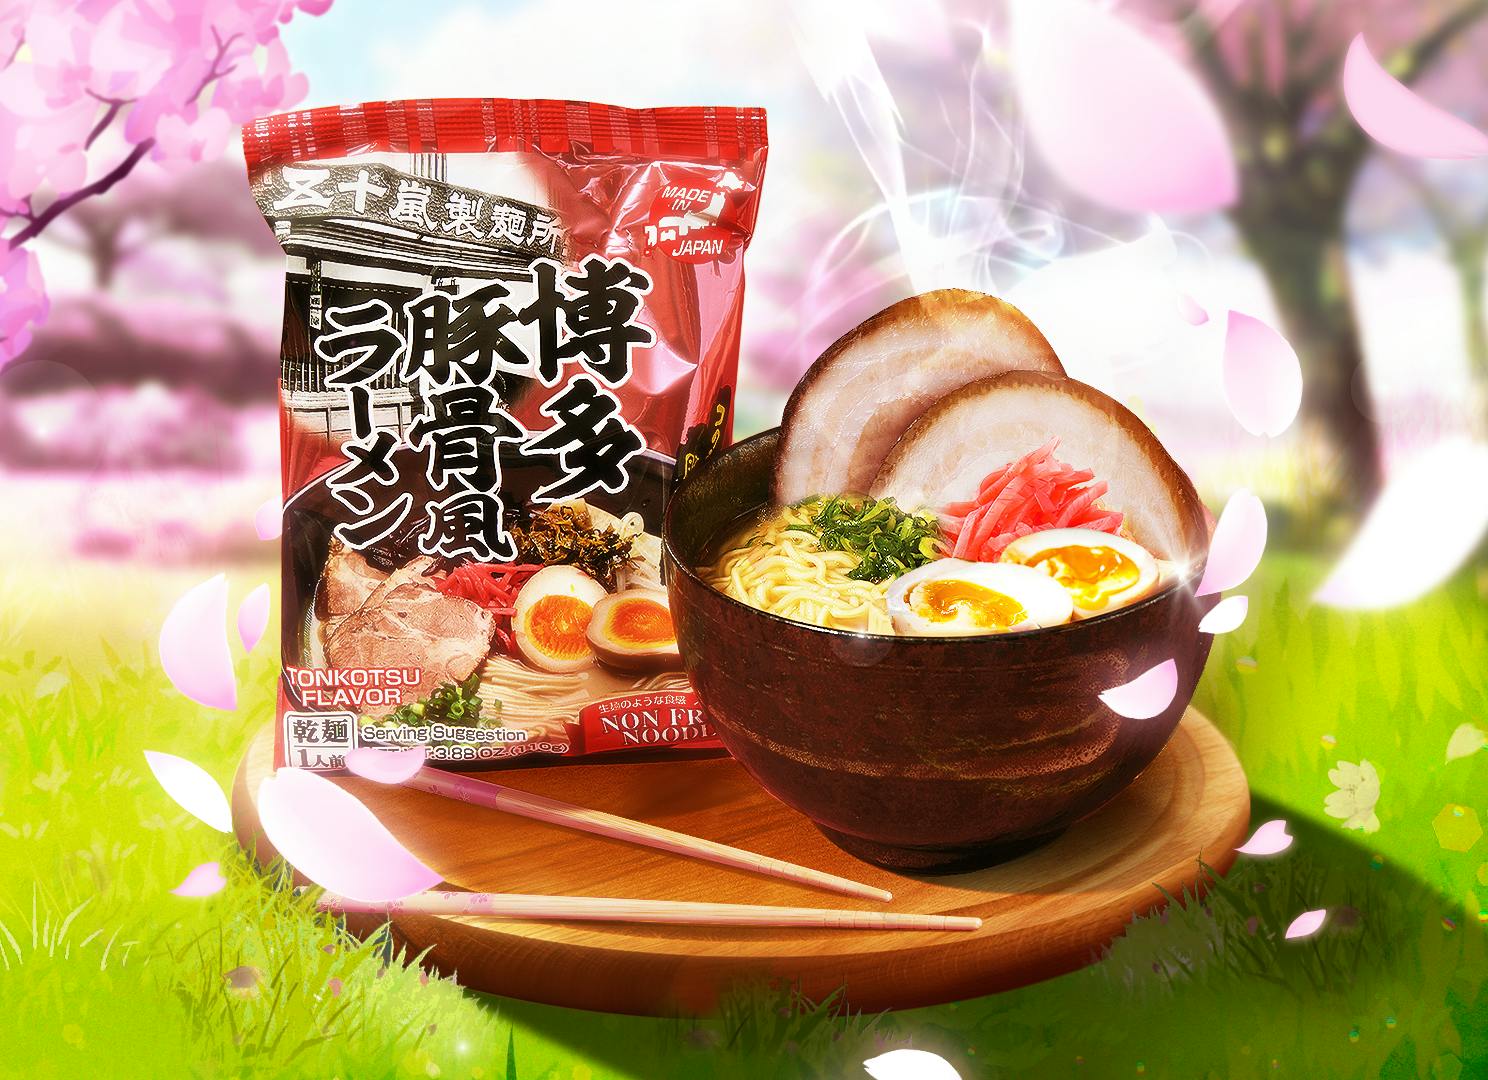 Hakata Tonkotsu Ramen sits steaming in a wooden bowl at a cherry blossom picnic, surrounded by cherry blossom petals.